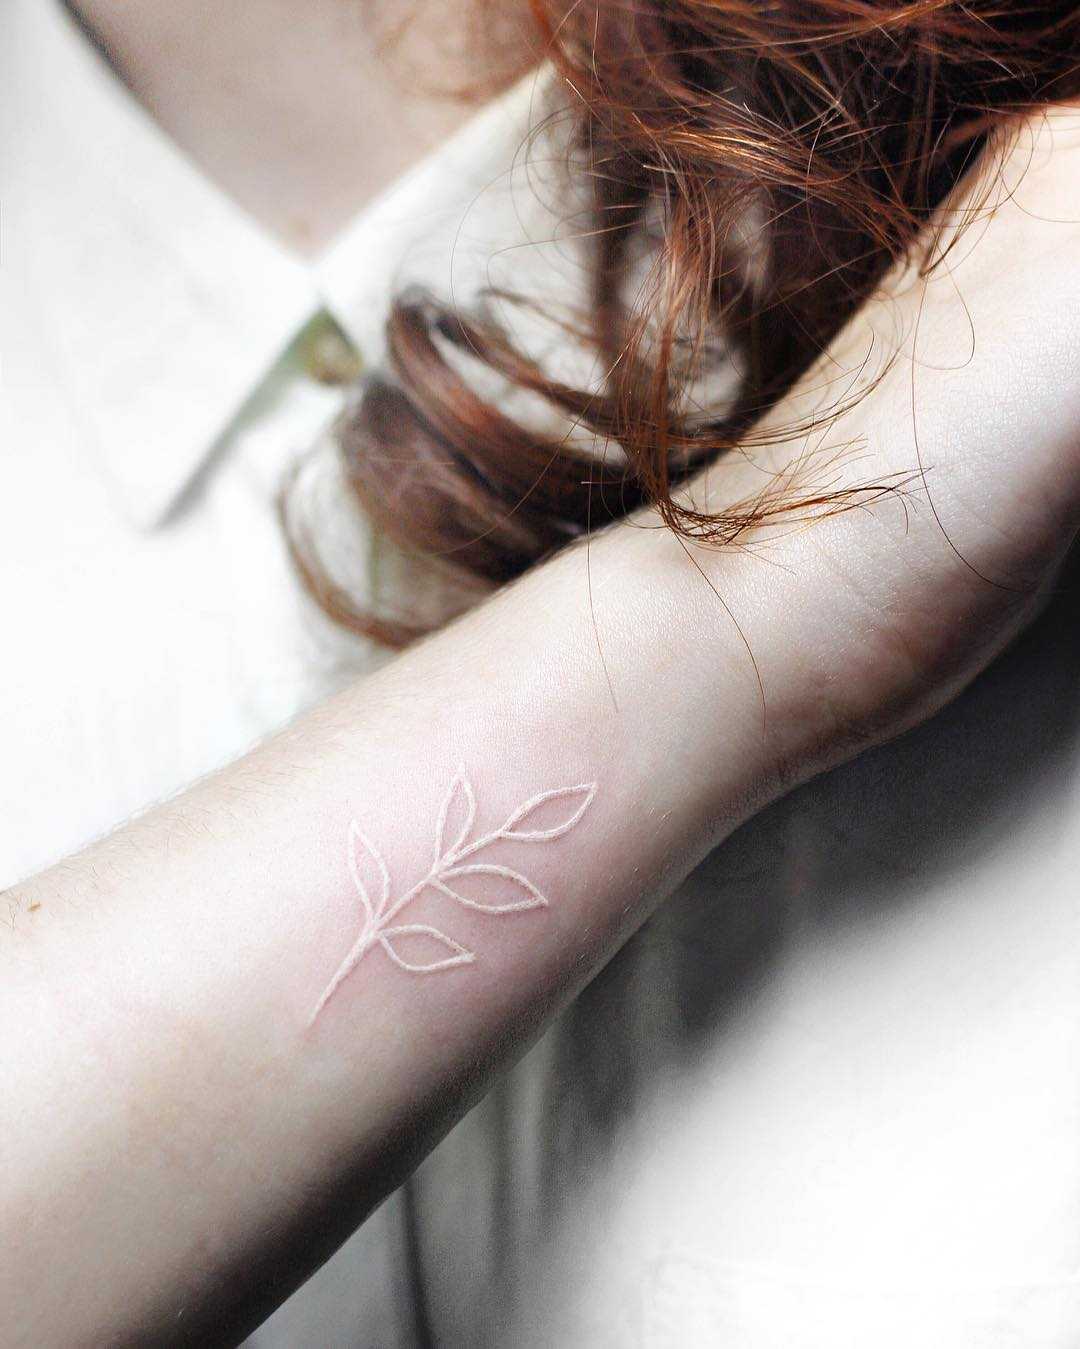 Small white branch on the forearm